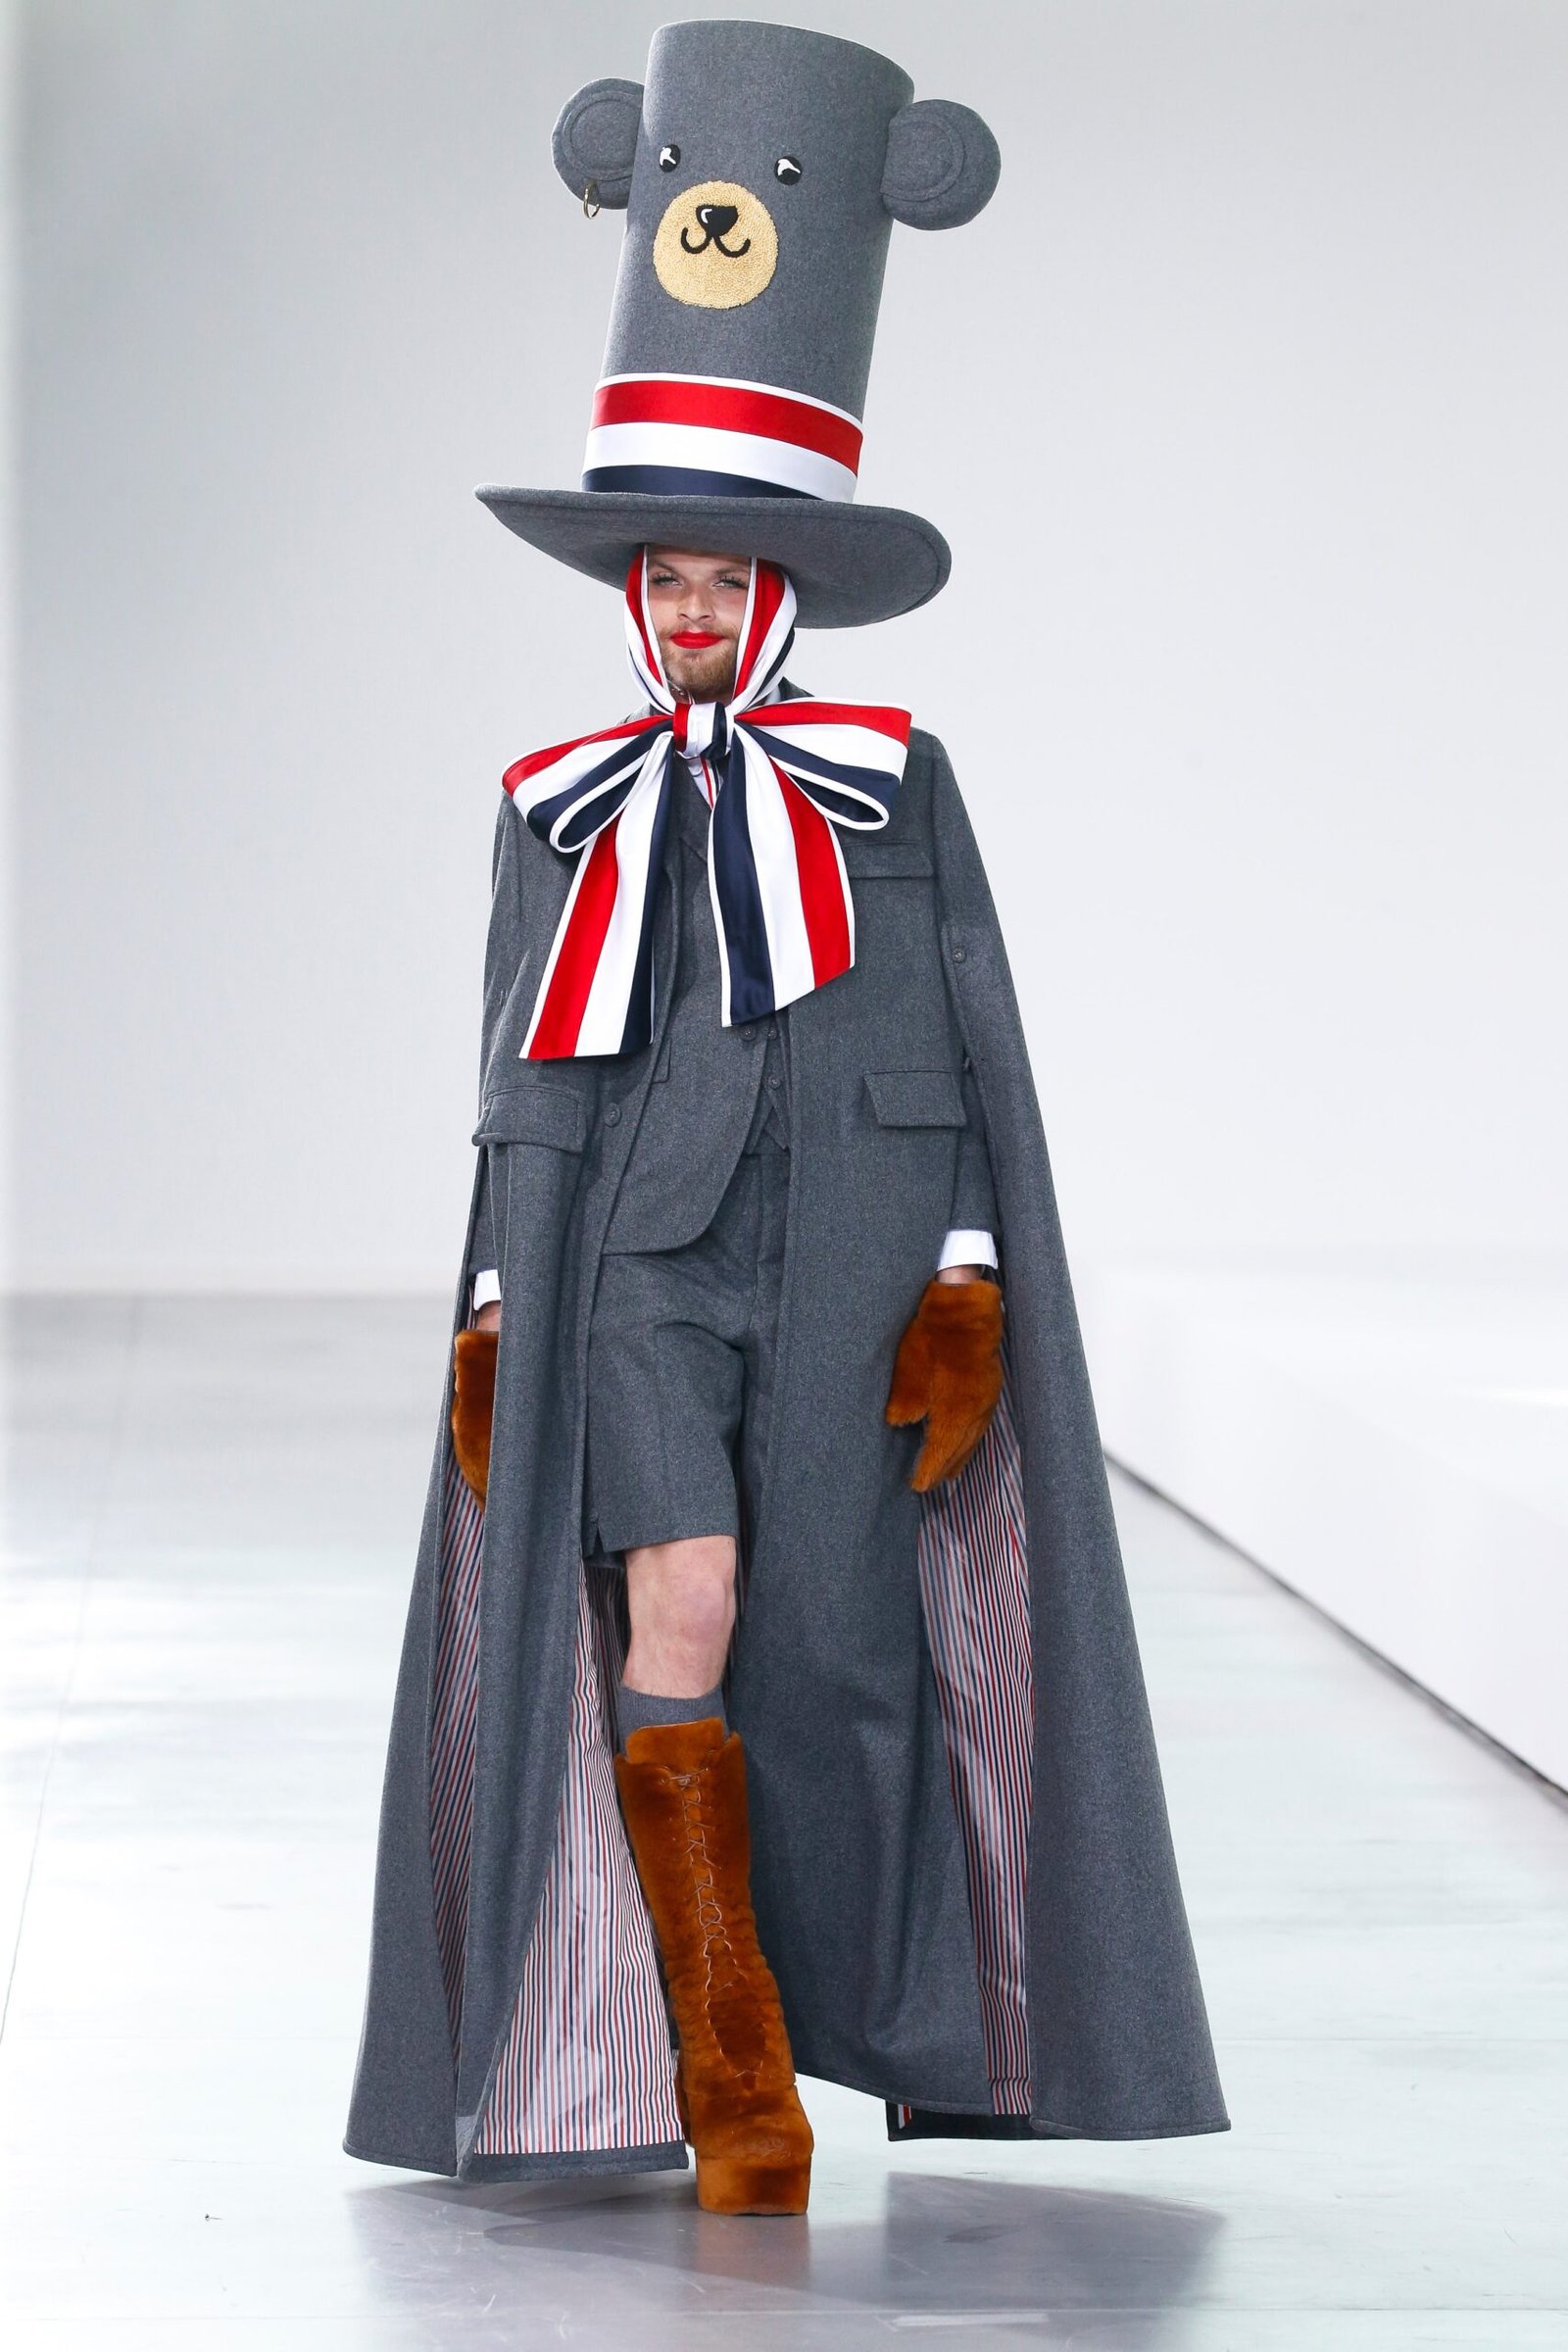 Thom Browne Tumble 2022 Ready-to-Set aside on